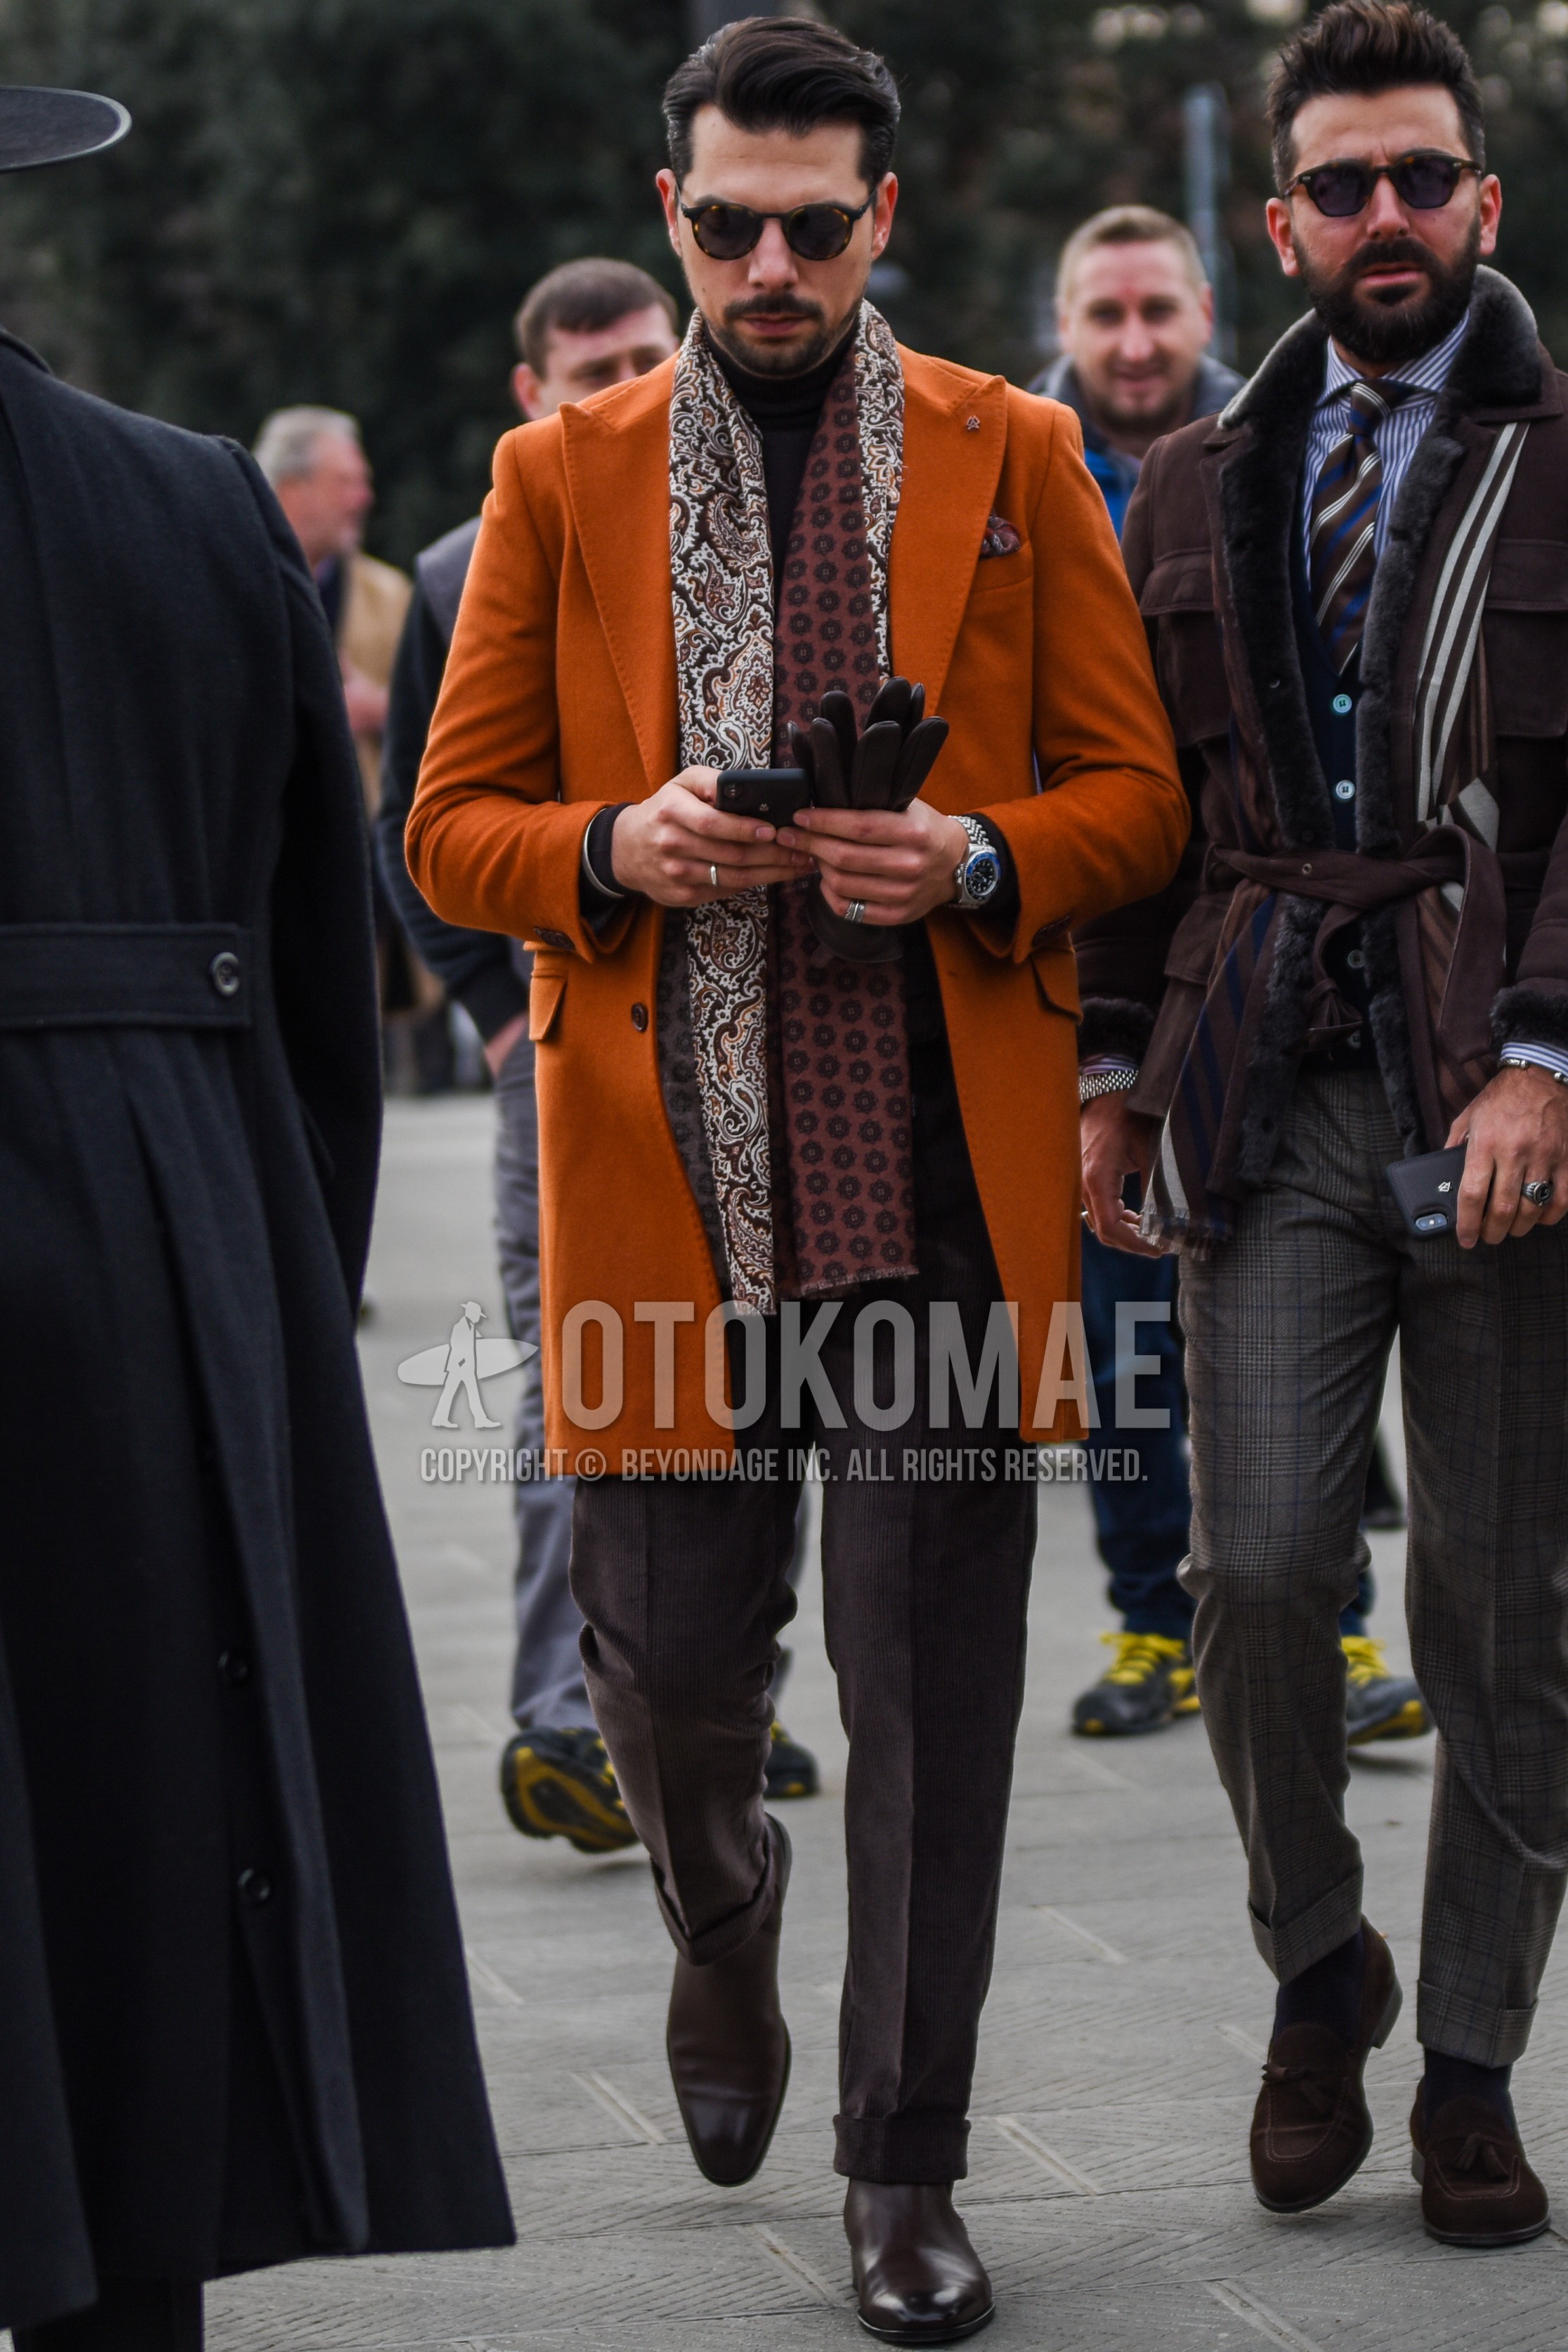 Men's autumn winter outfit with brown tortoiseshell sunglasses, brown paisley scarf, brown small crest scarf, orange plain chester coat, brown plain turtleneck knit, brown plain slacks, brown side-gore boots.